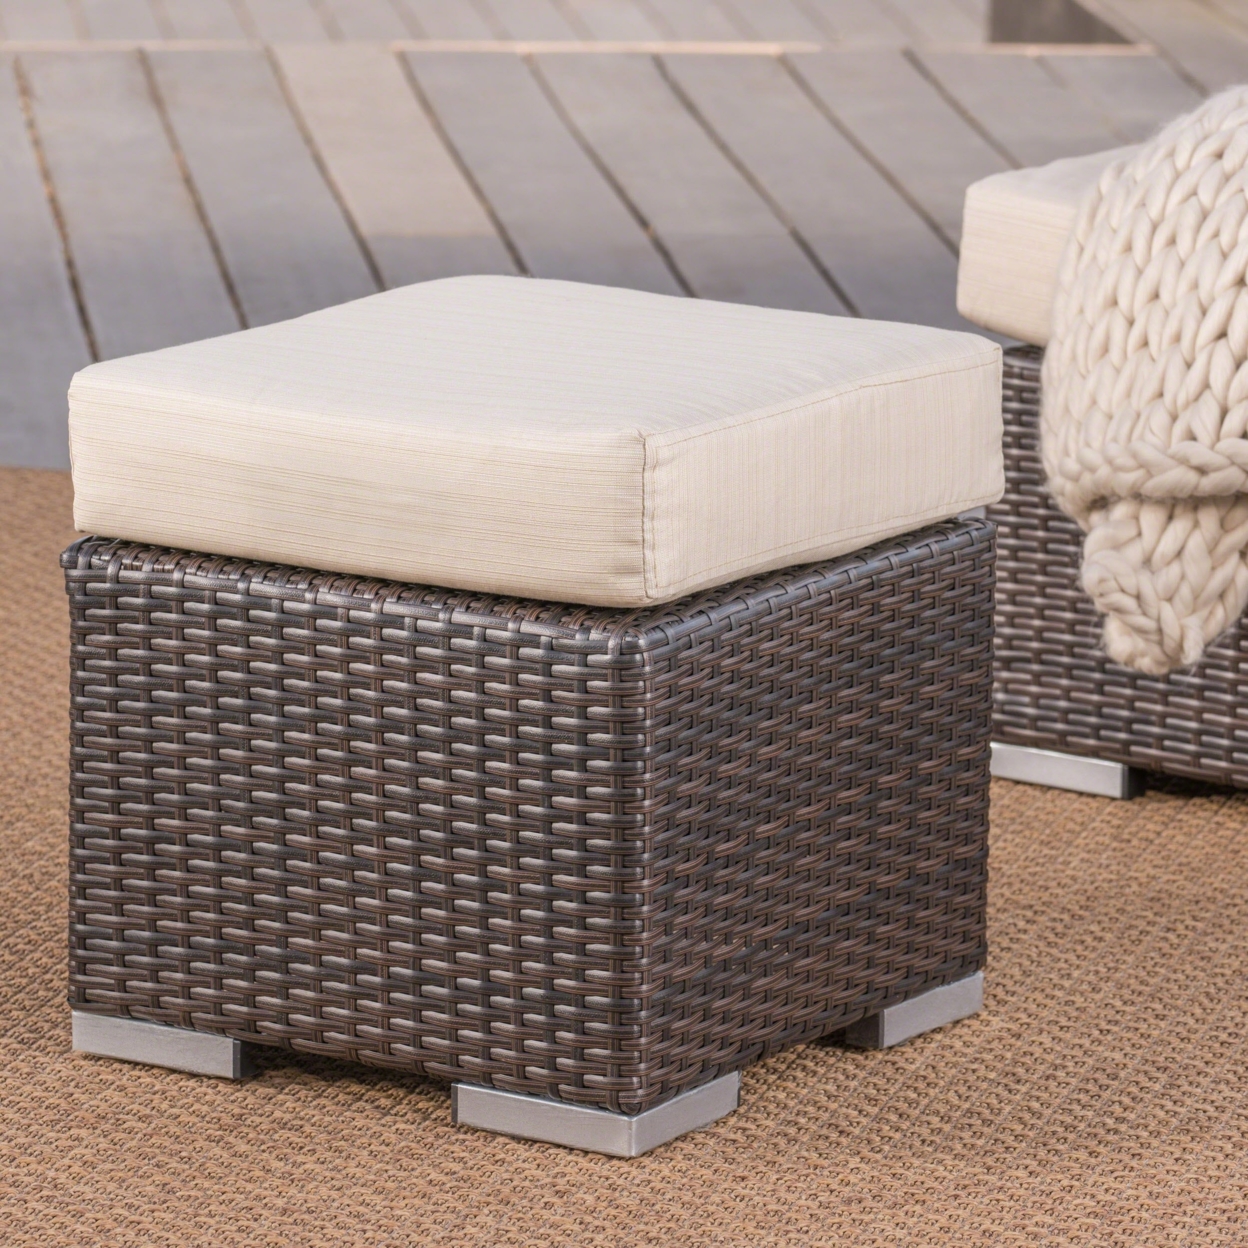 Santa Rosa Outdoor 16 Inch Wicker Ottoman Seat With Water Resistant Cushion - Multi-brown/beige, Single